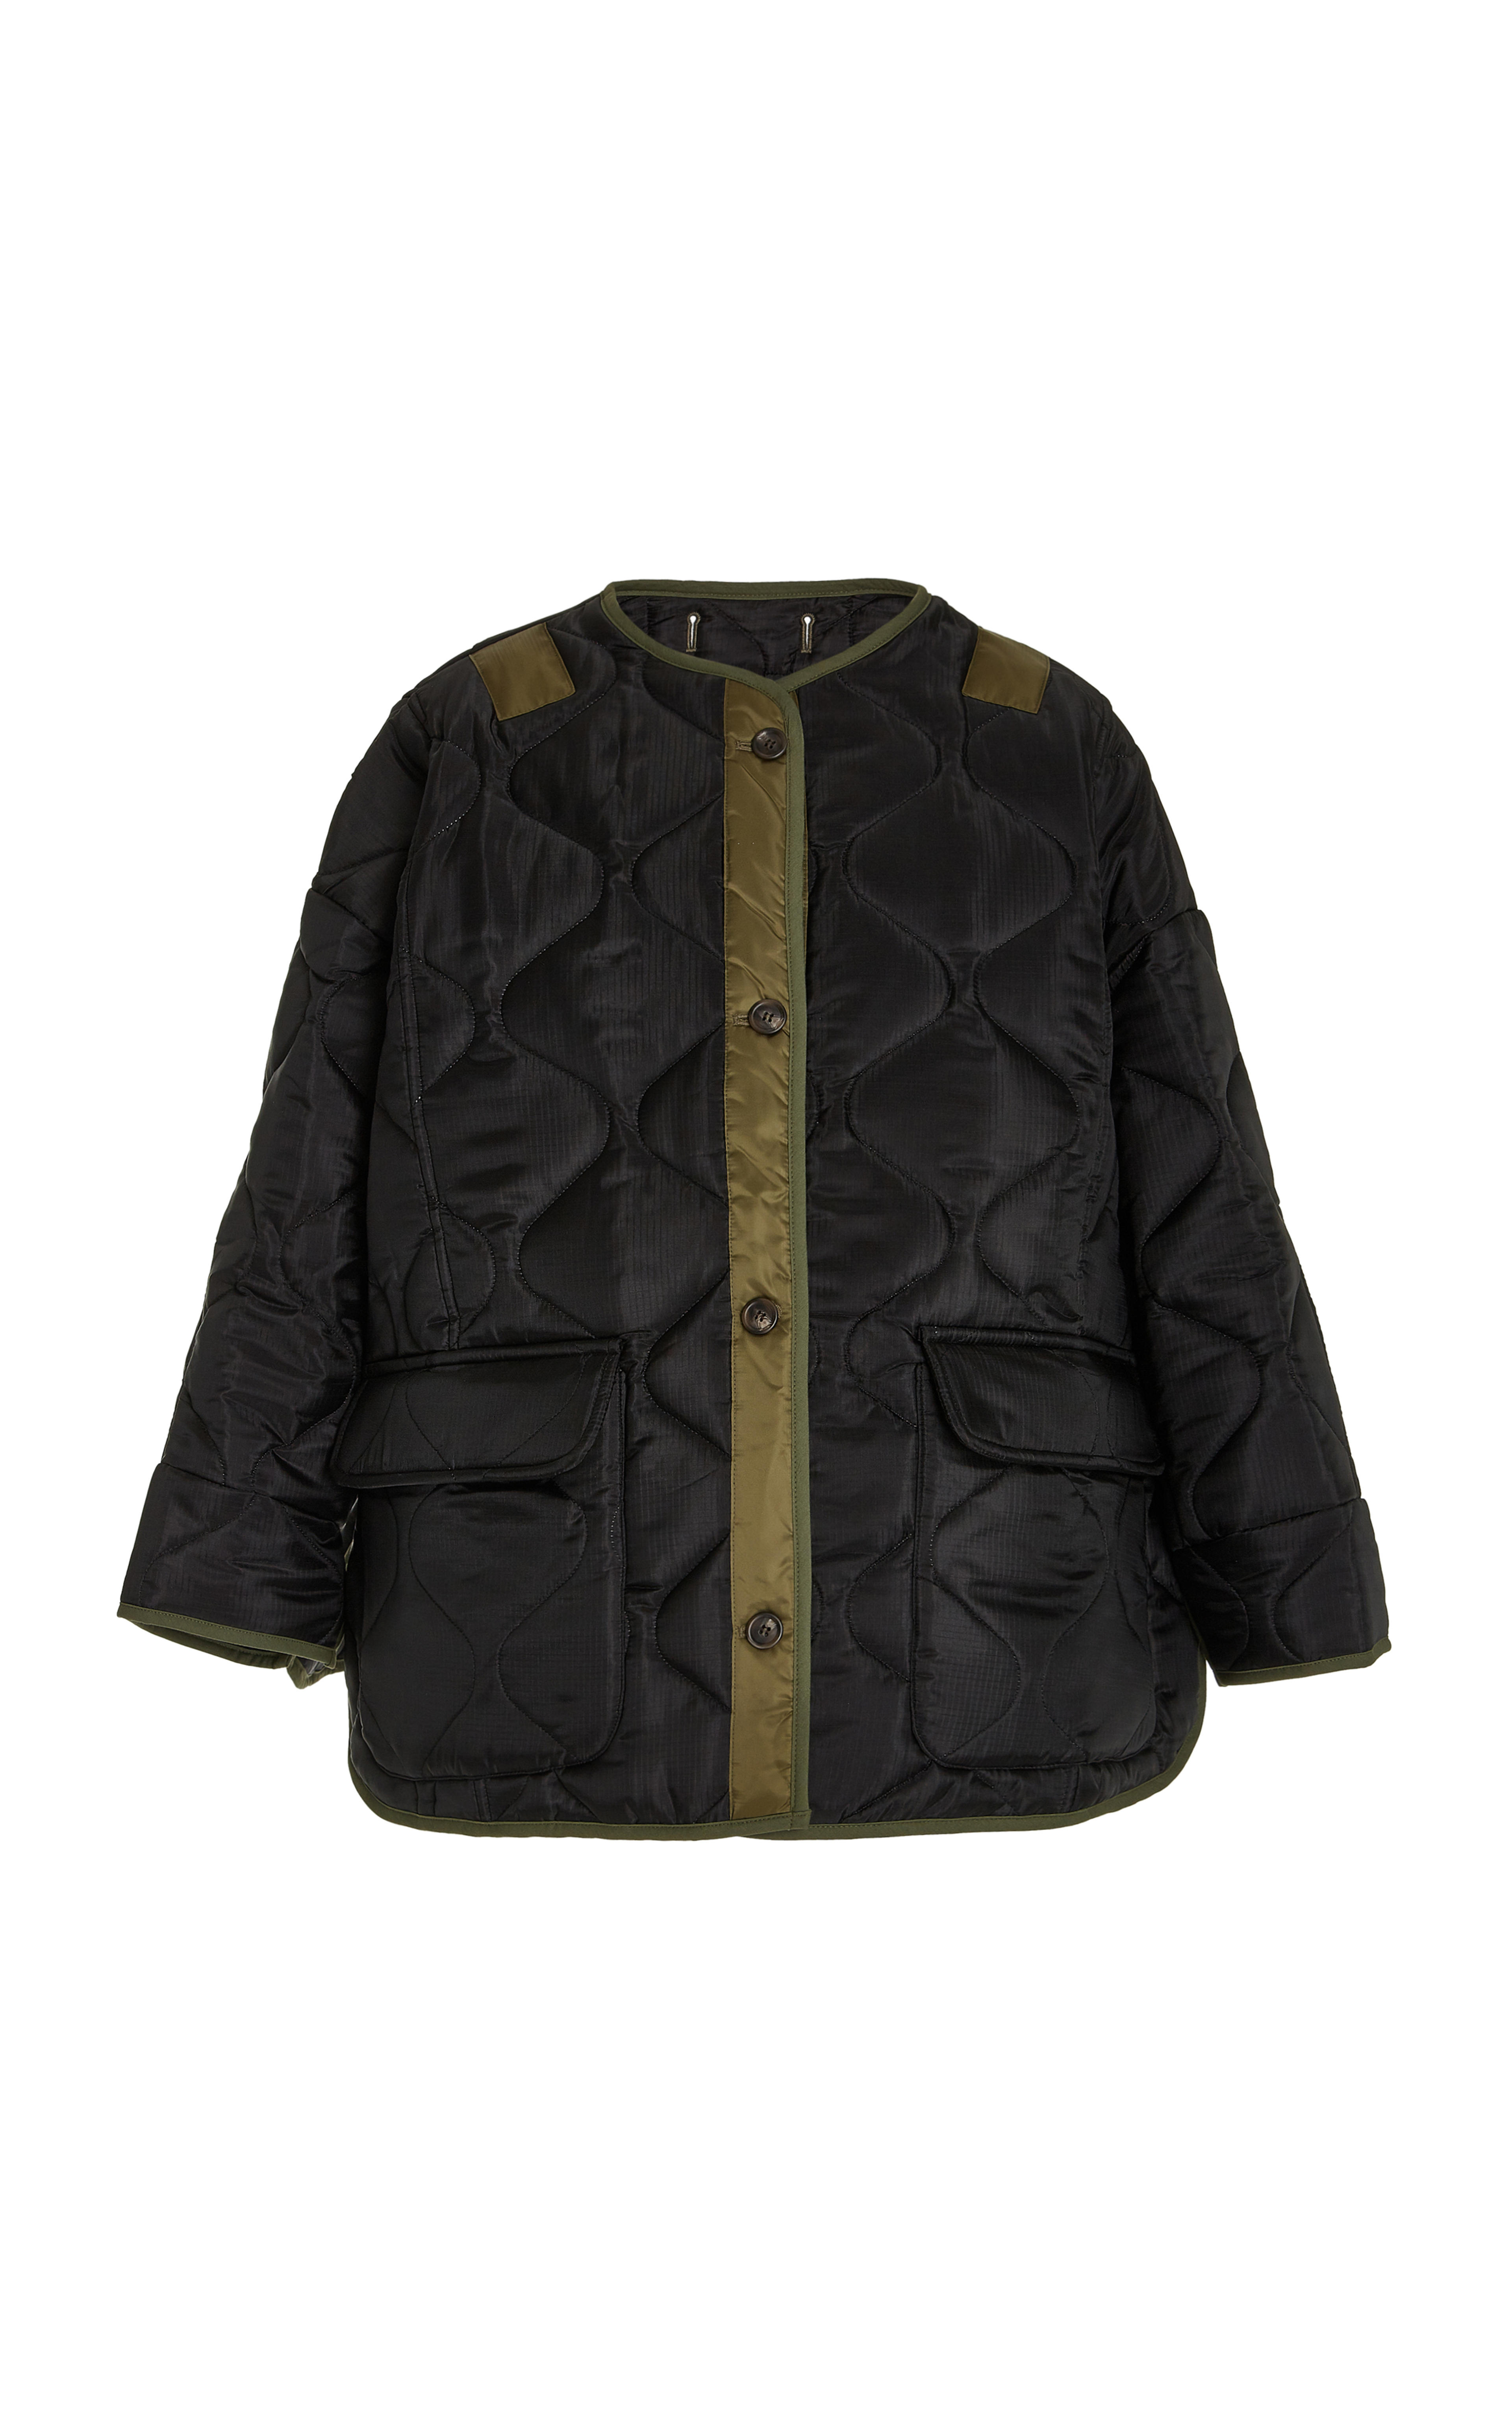 The Frankie Shop - Teddy Oversized Quilted Jacket